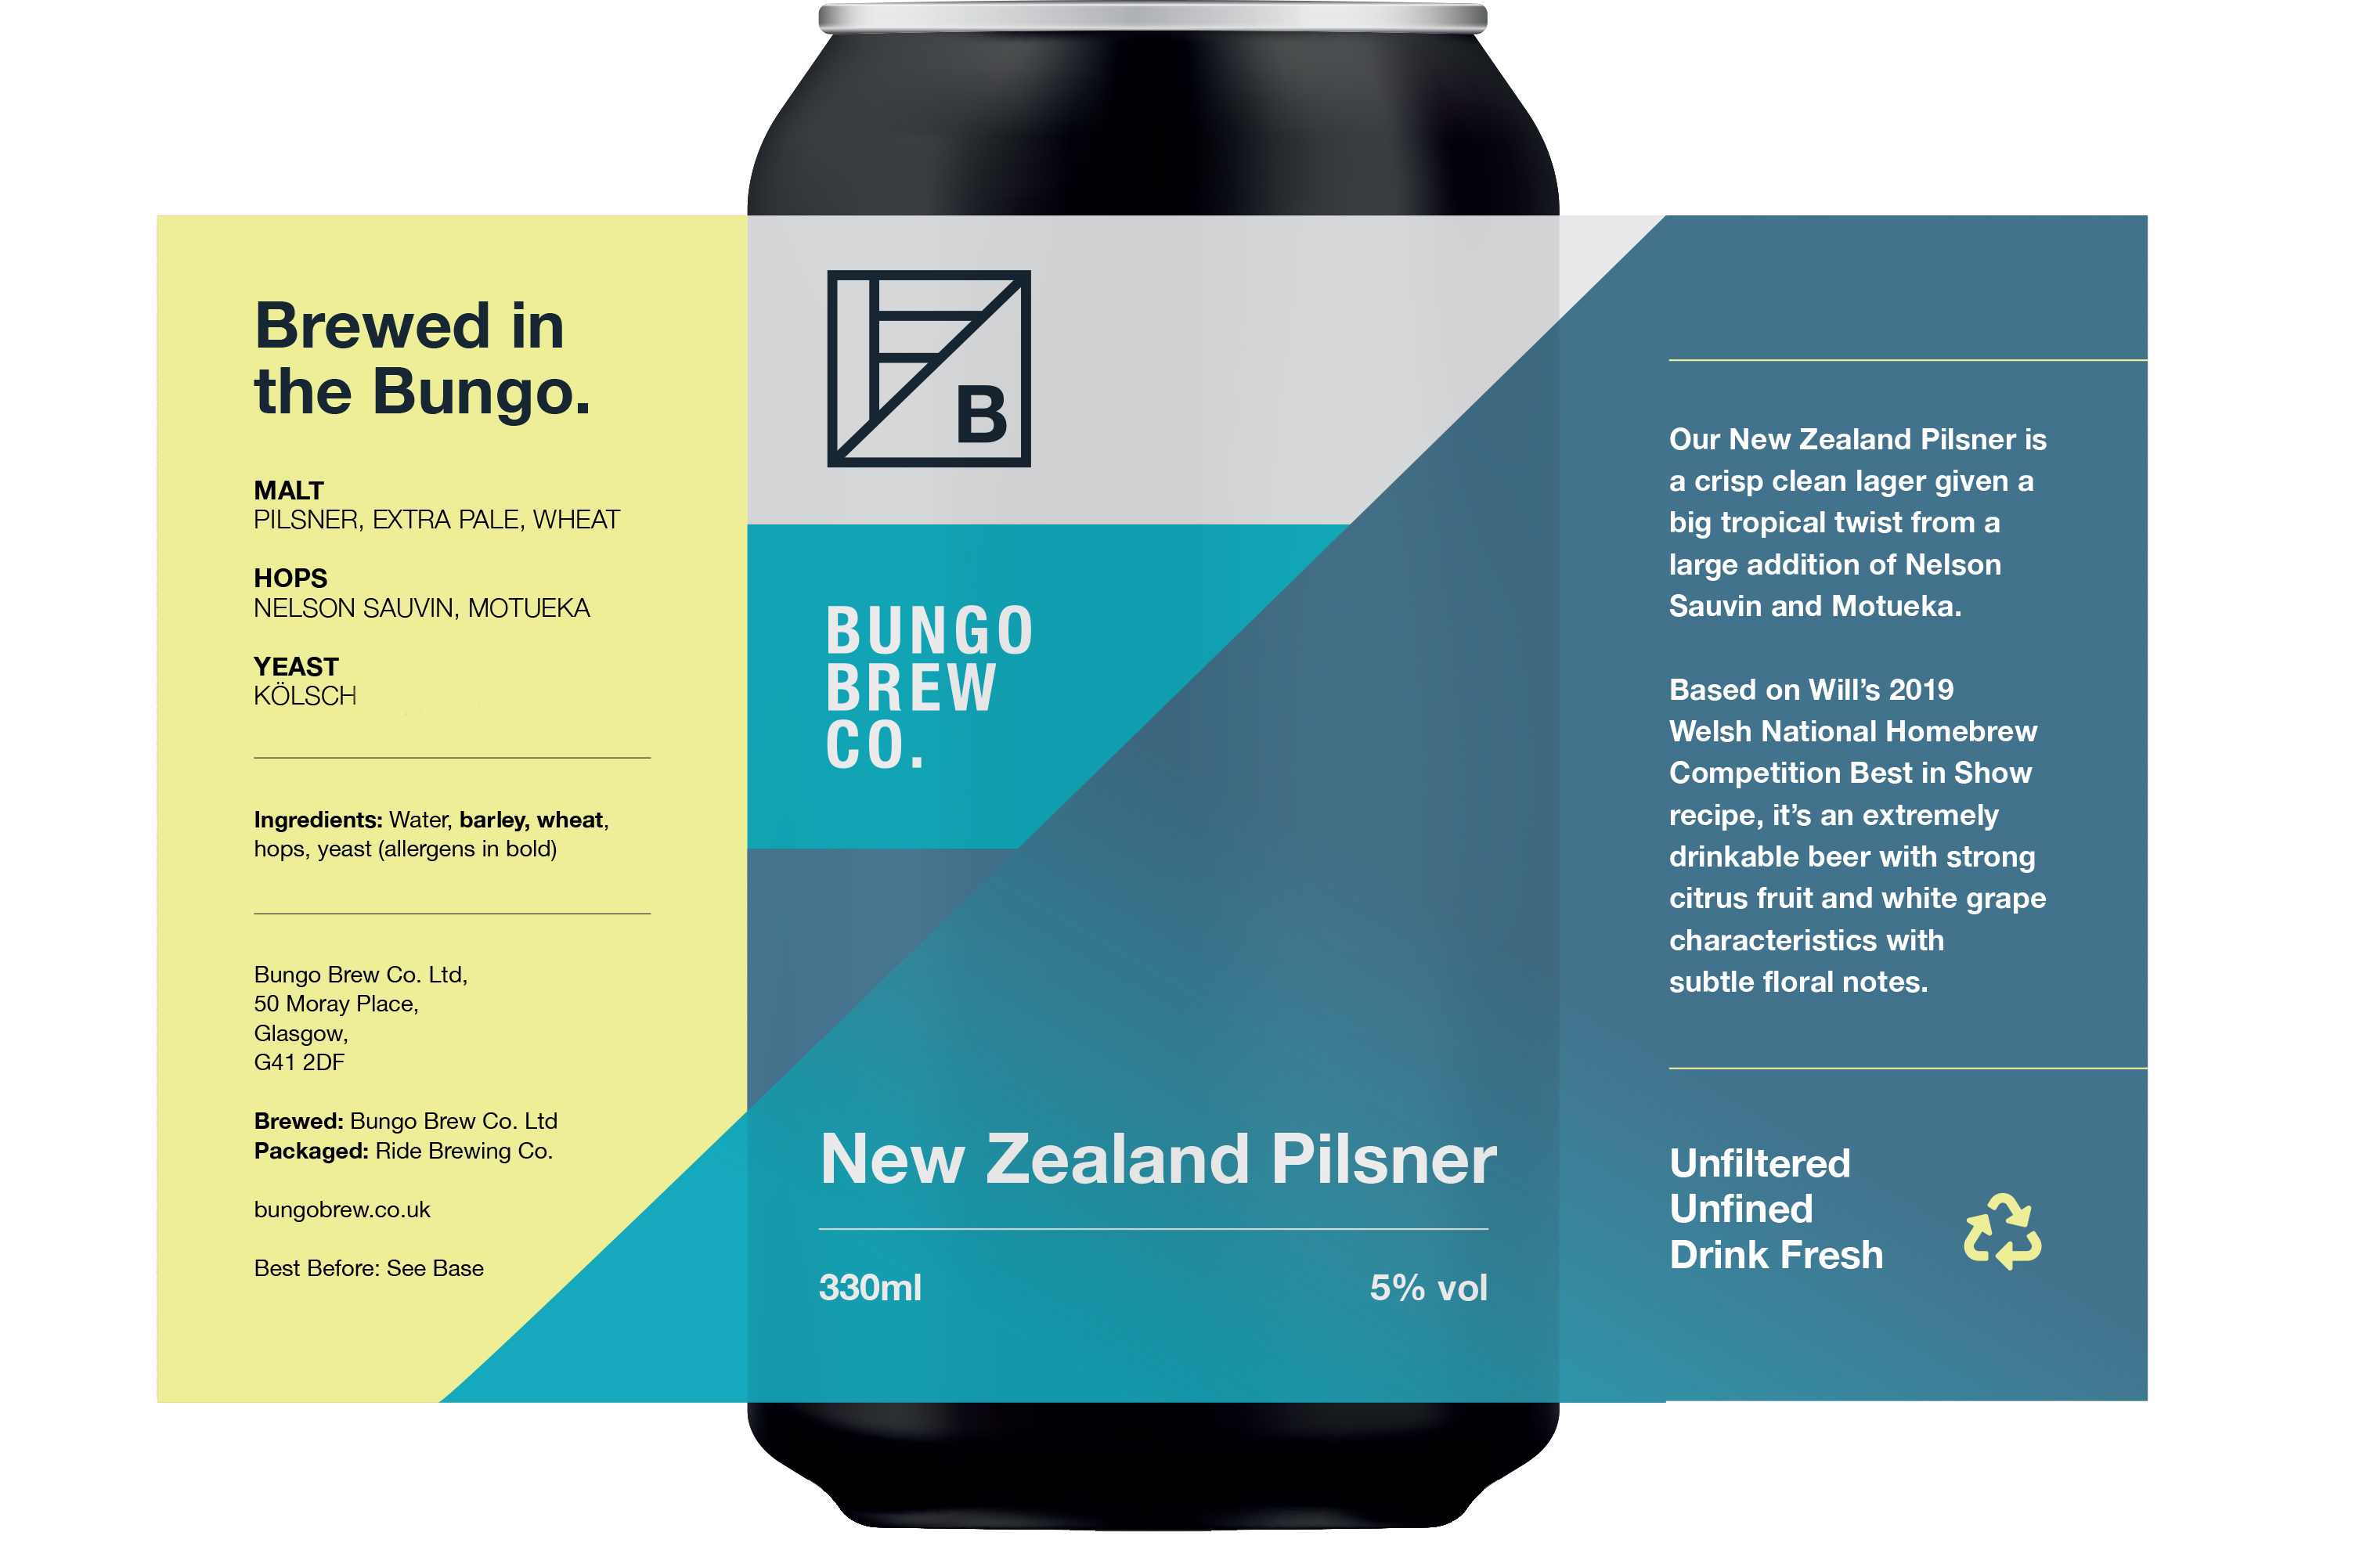 Our New Zealand Pilsner